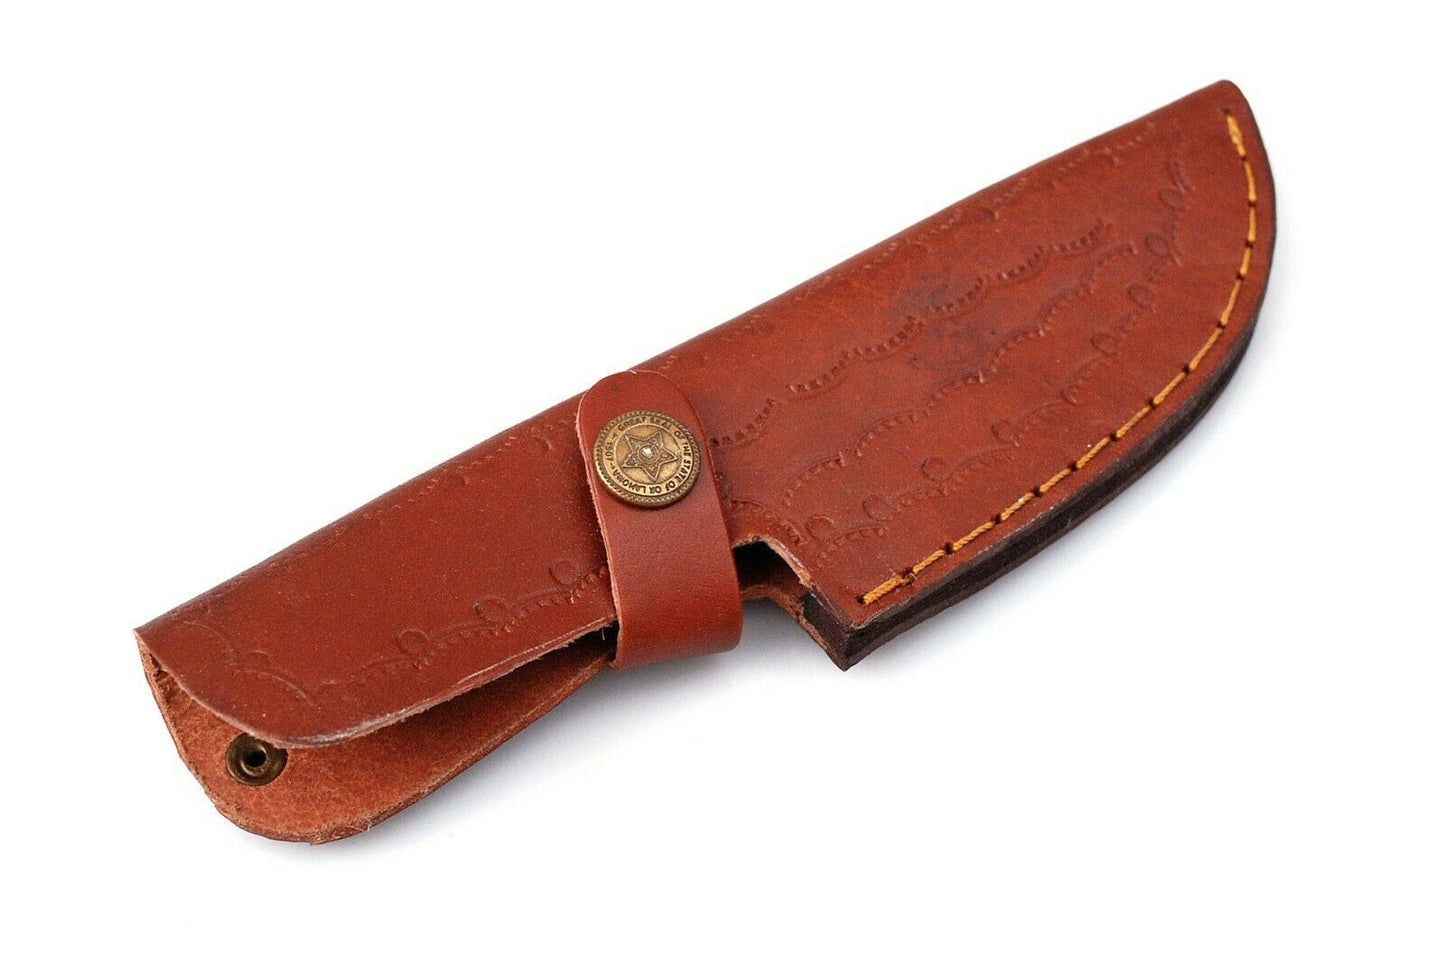 HANDMADE Genuine Hand Crafted BELT SHEATH Holster For FIXED BLADE KNIFE